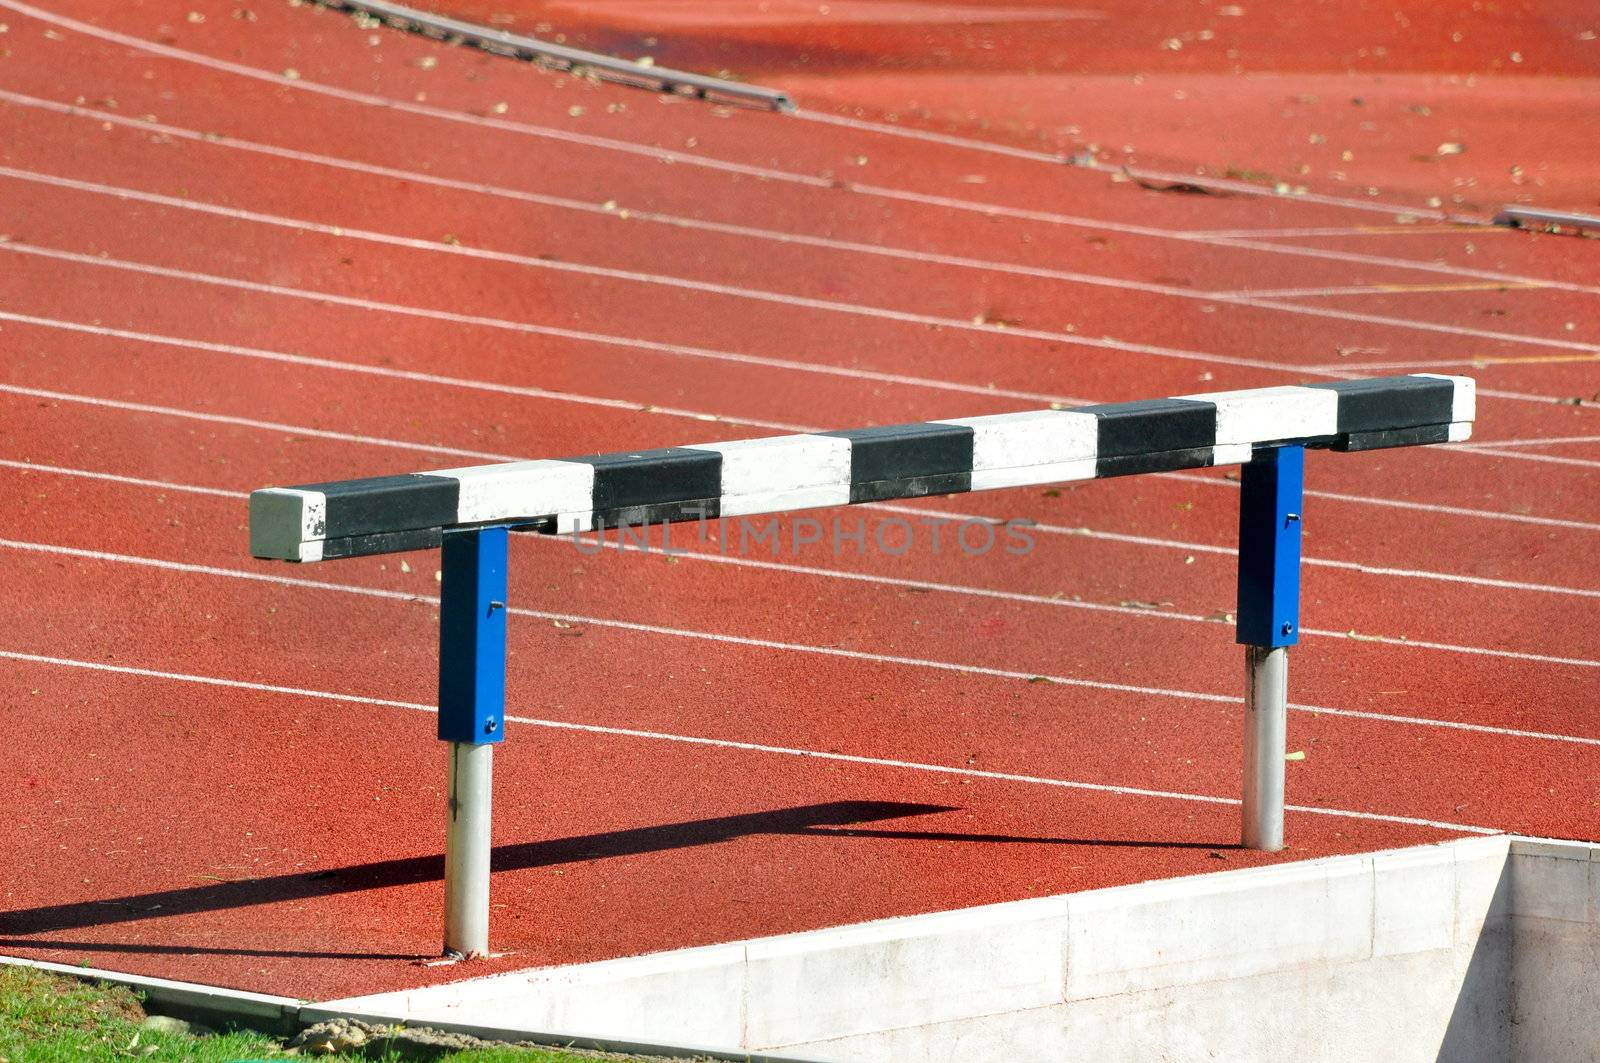 Detail of an hurdle in an athletics running track
